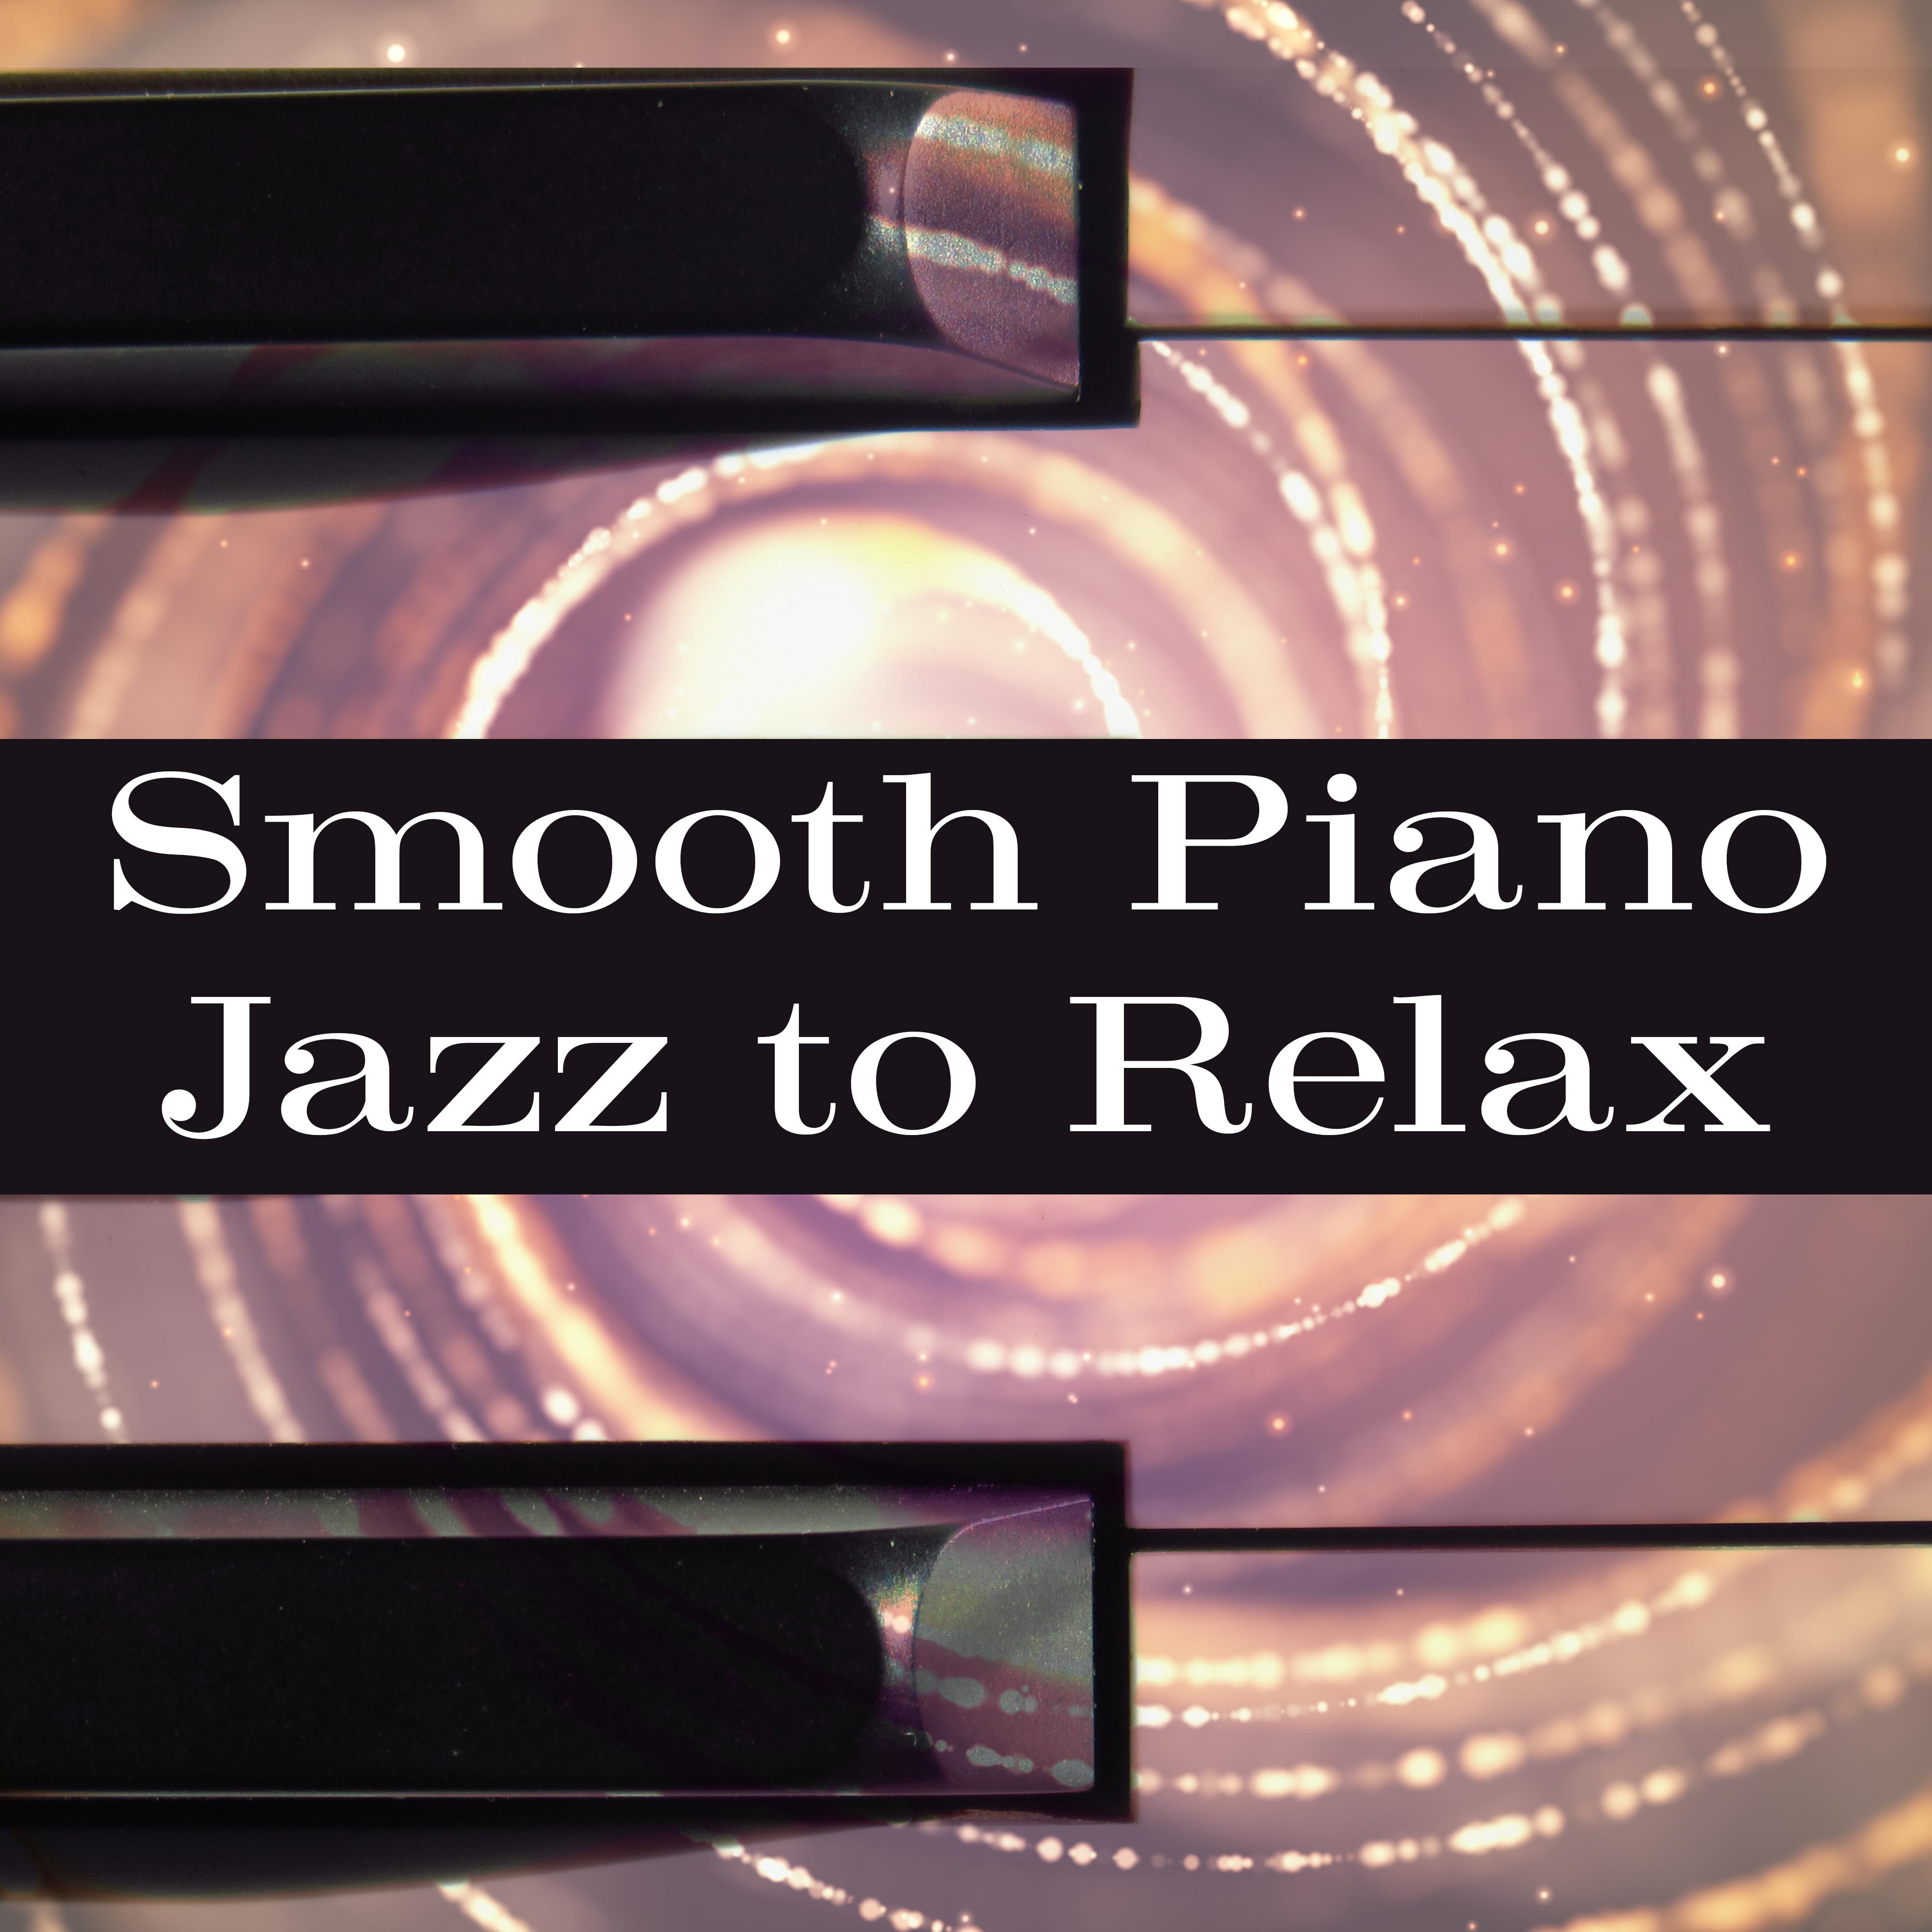 Smooth Piano Jazz to Relax  Calm Down with Peaceful Music, Rest in Home, Moonlight Jazz